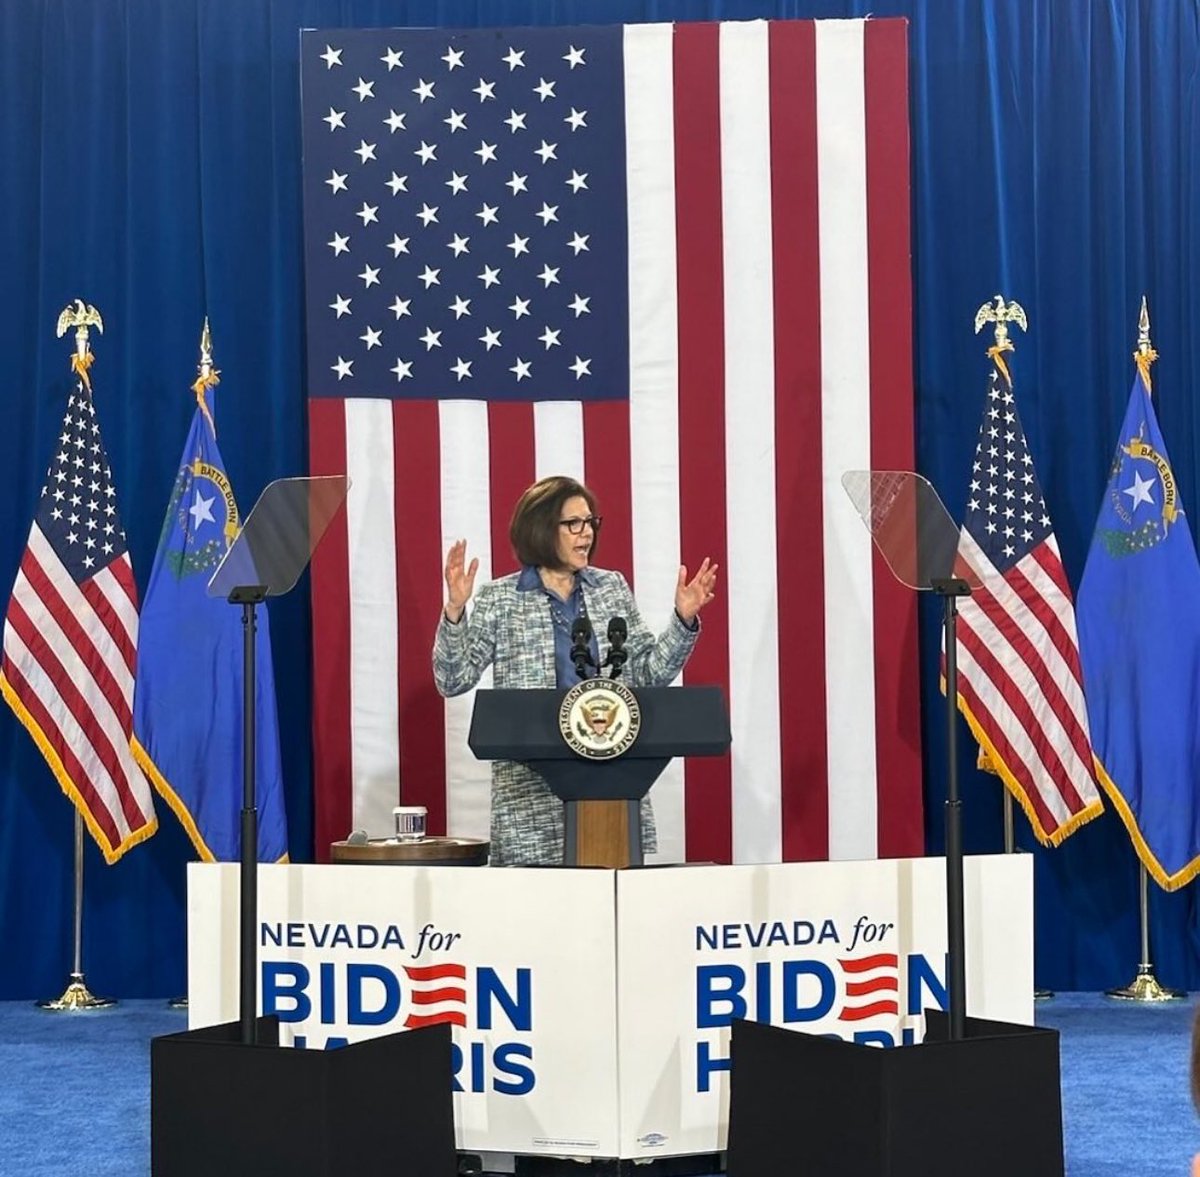 Nevada is fired up and ready to reelect President Biden and Vice President Harris!